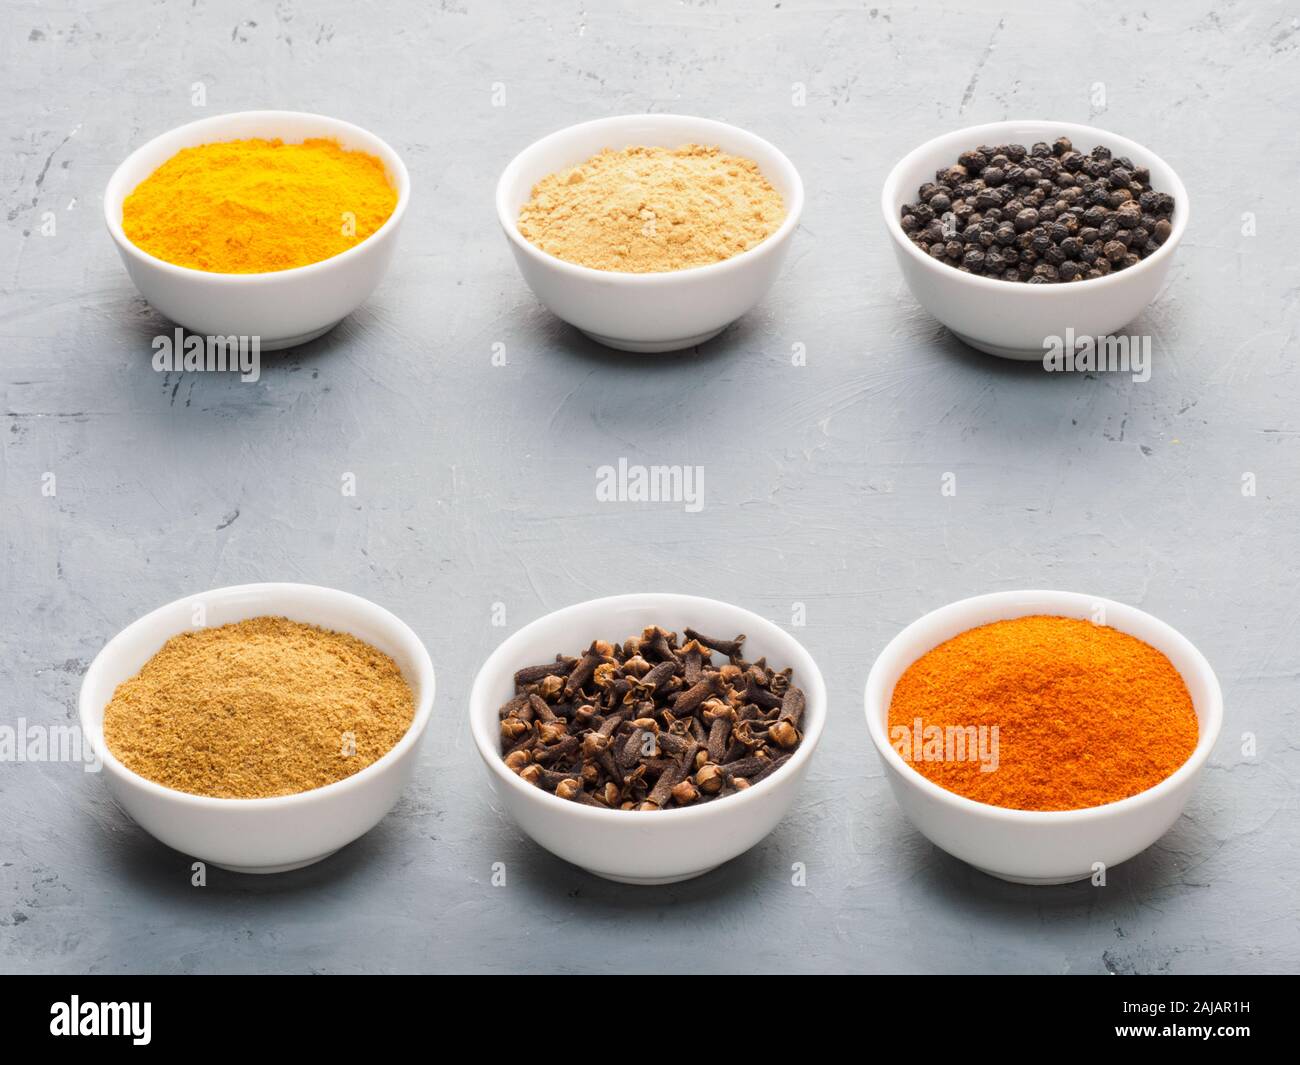 Spice dry ginger, black pepper, masala, turmeric, cloves, red chili in white bowls on gray concrete background Stock Photo